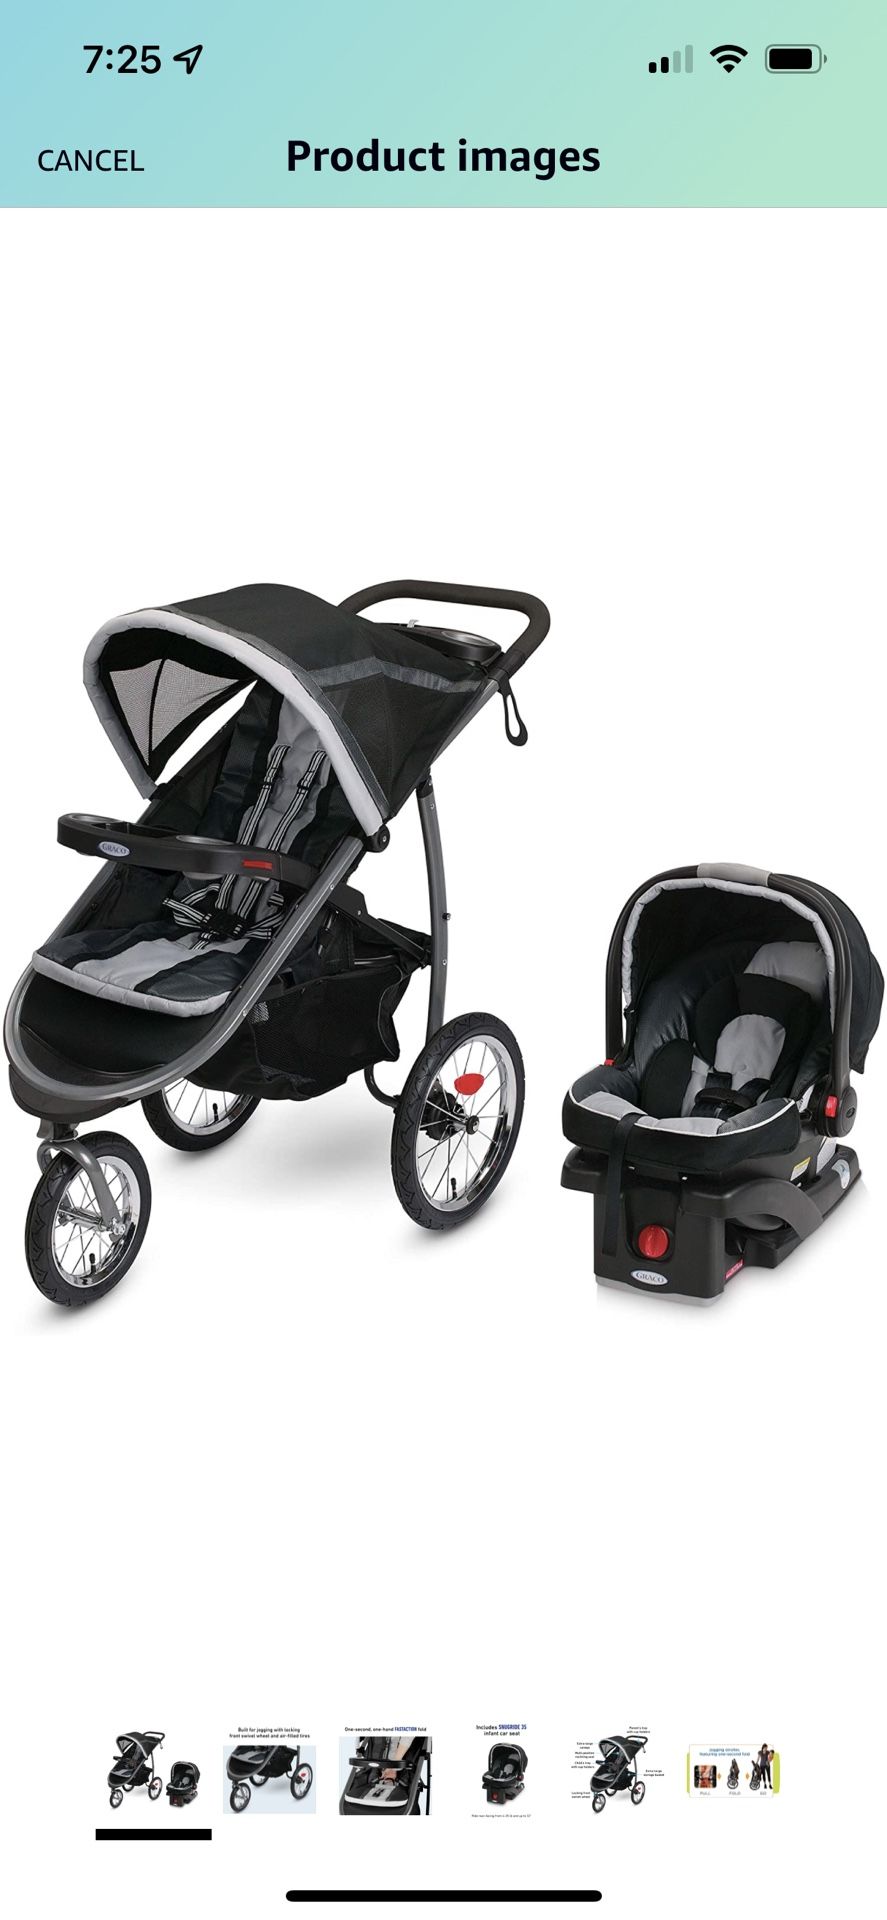 New In Box Graco FastAction Fold Jogger Travel System | Includes the Jogging Stroller and SnugRide 35 Infant Car Seat, Gotham